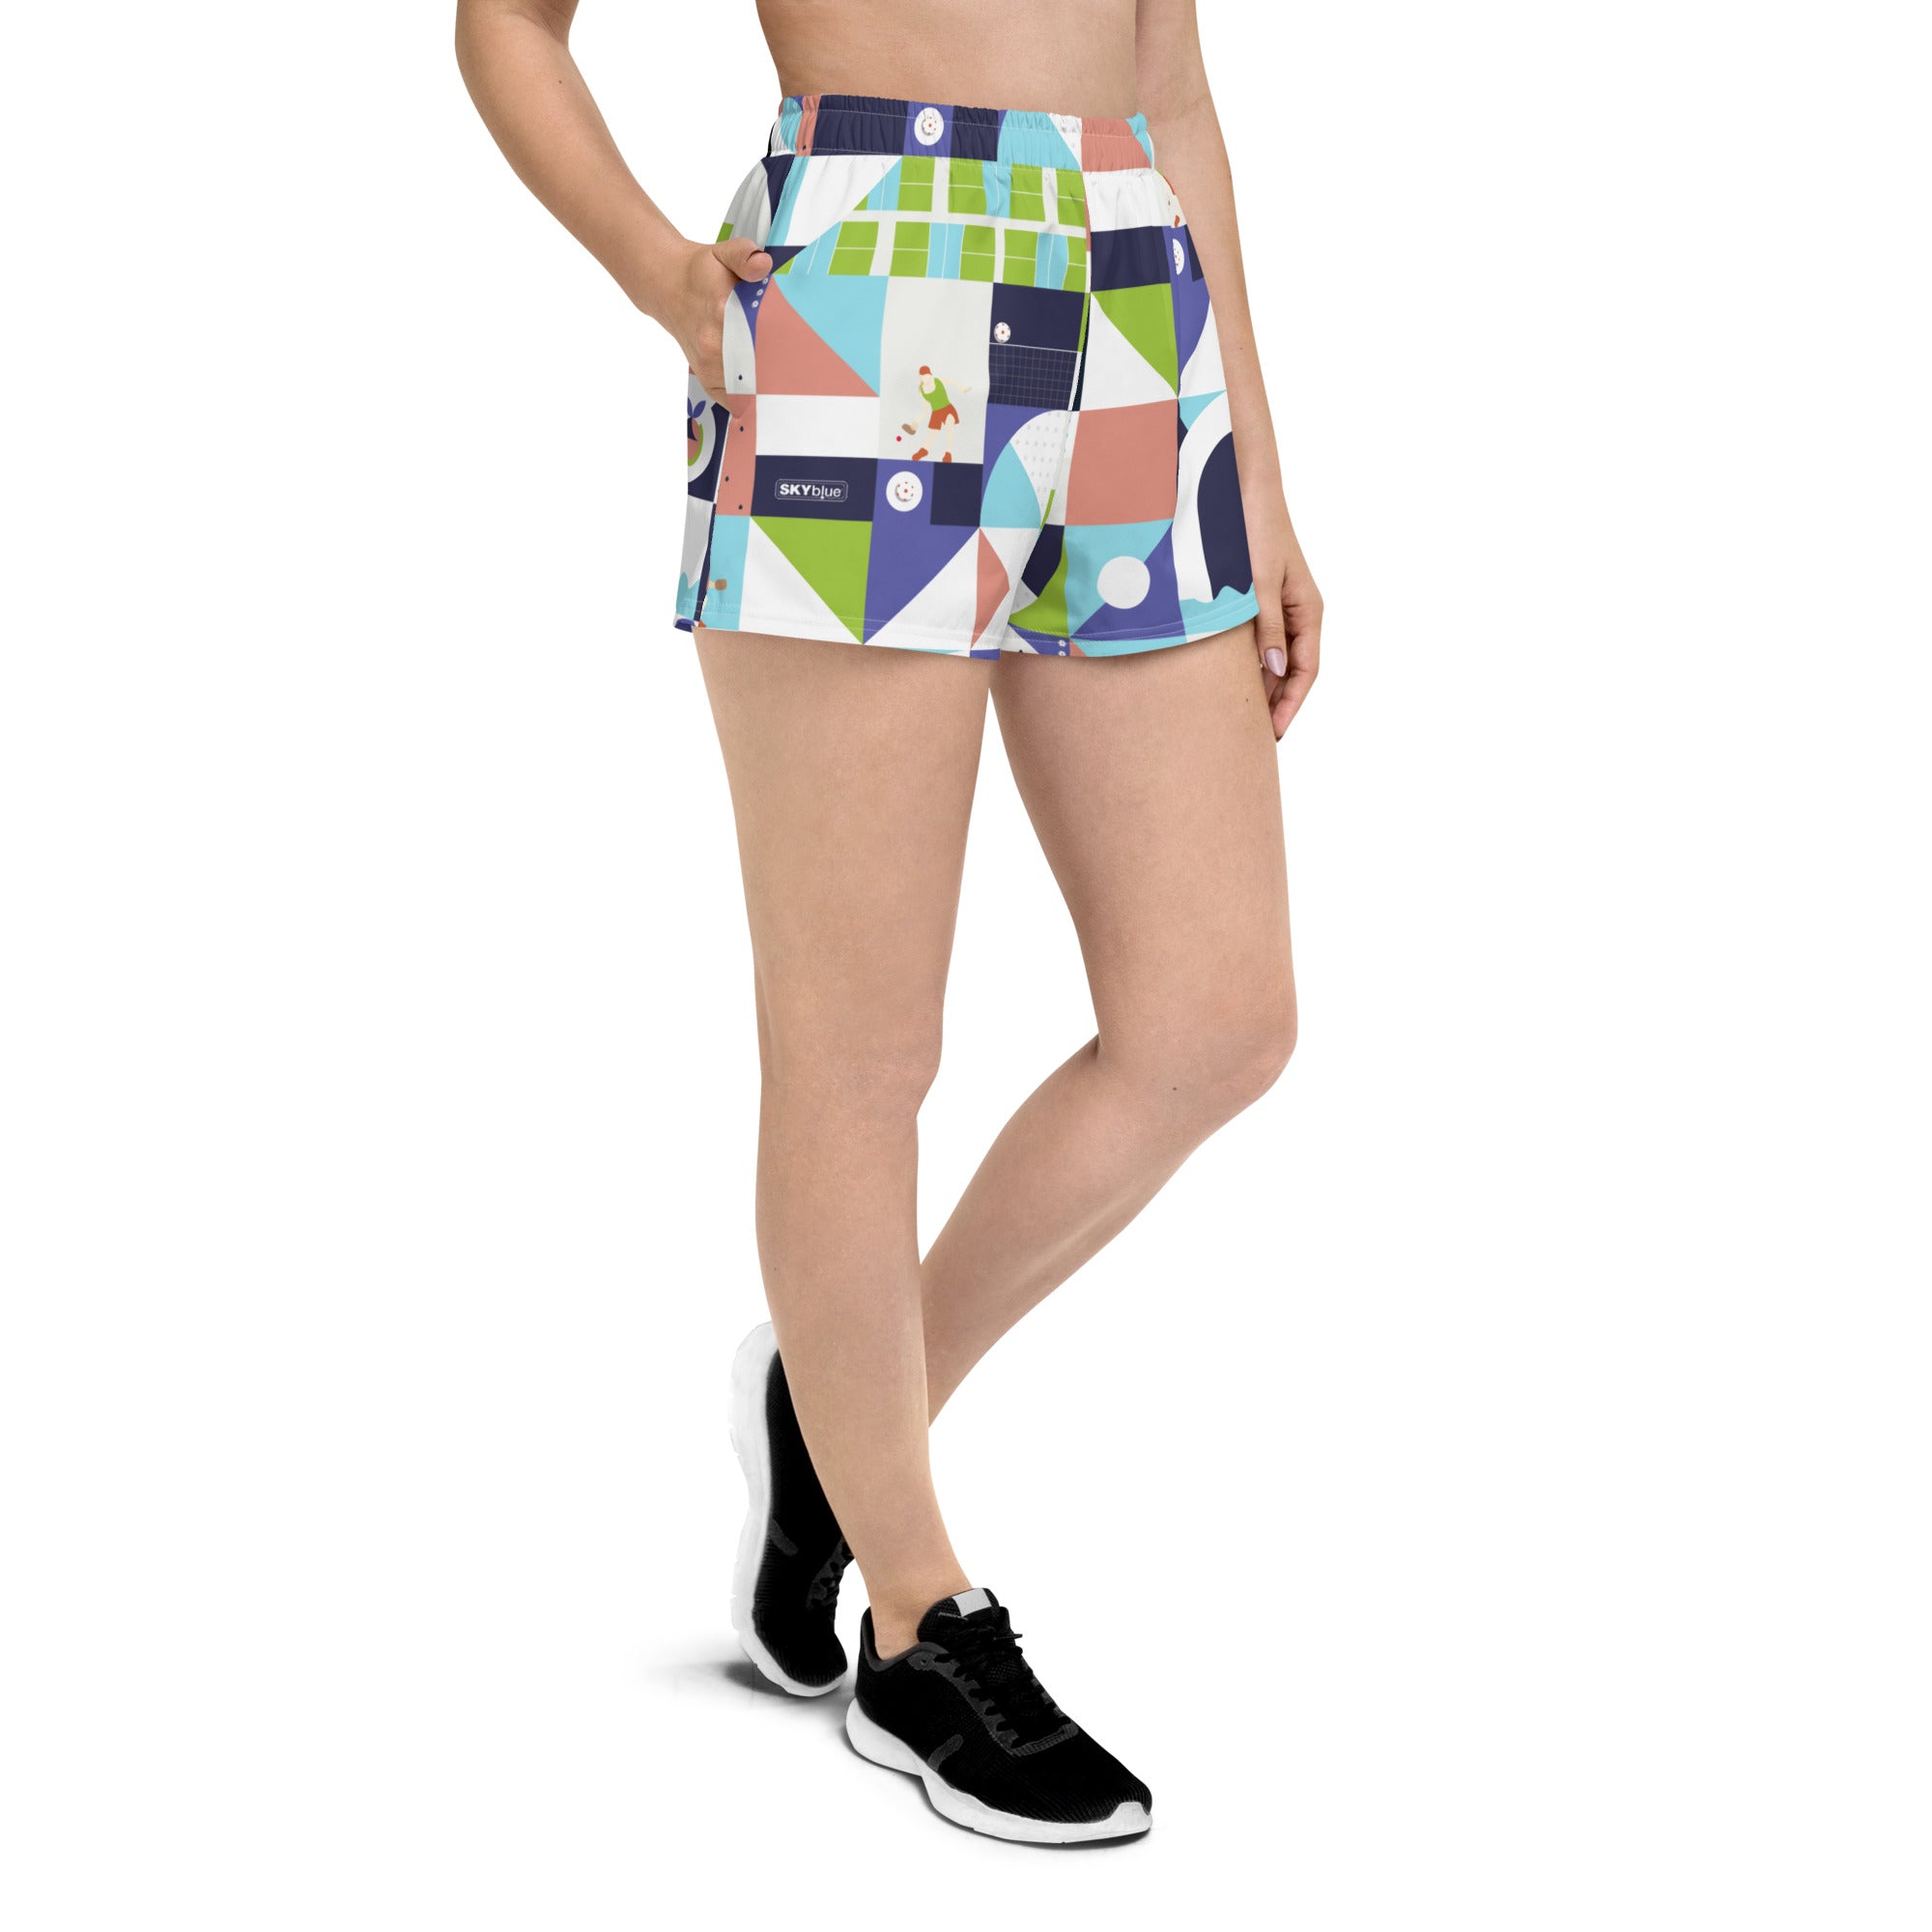 Dink & Drive under the Sun Rowdy© Women's Pickleball Athletic Short Shorts w/pockets